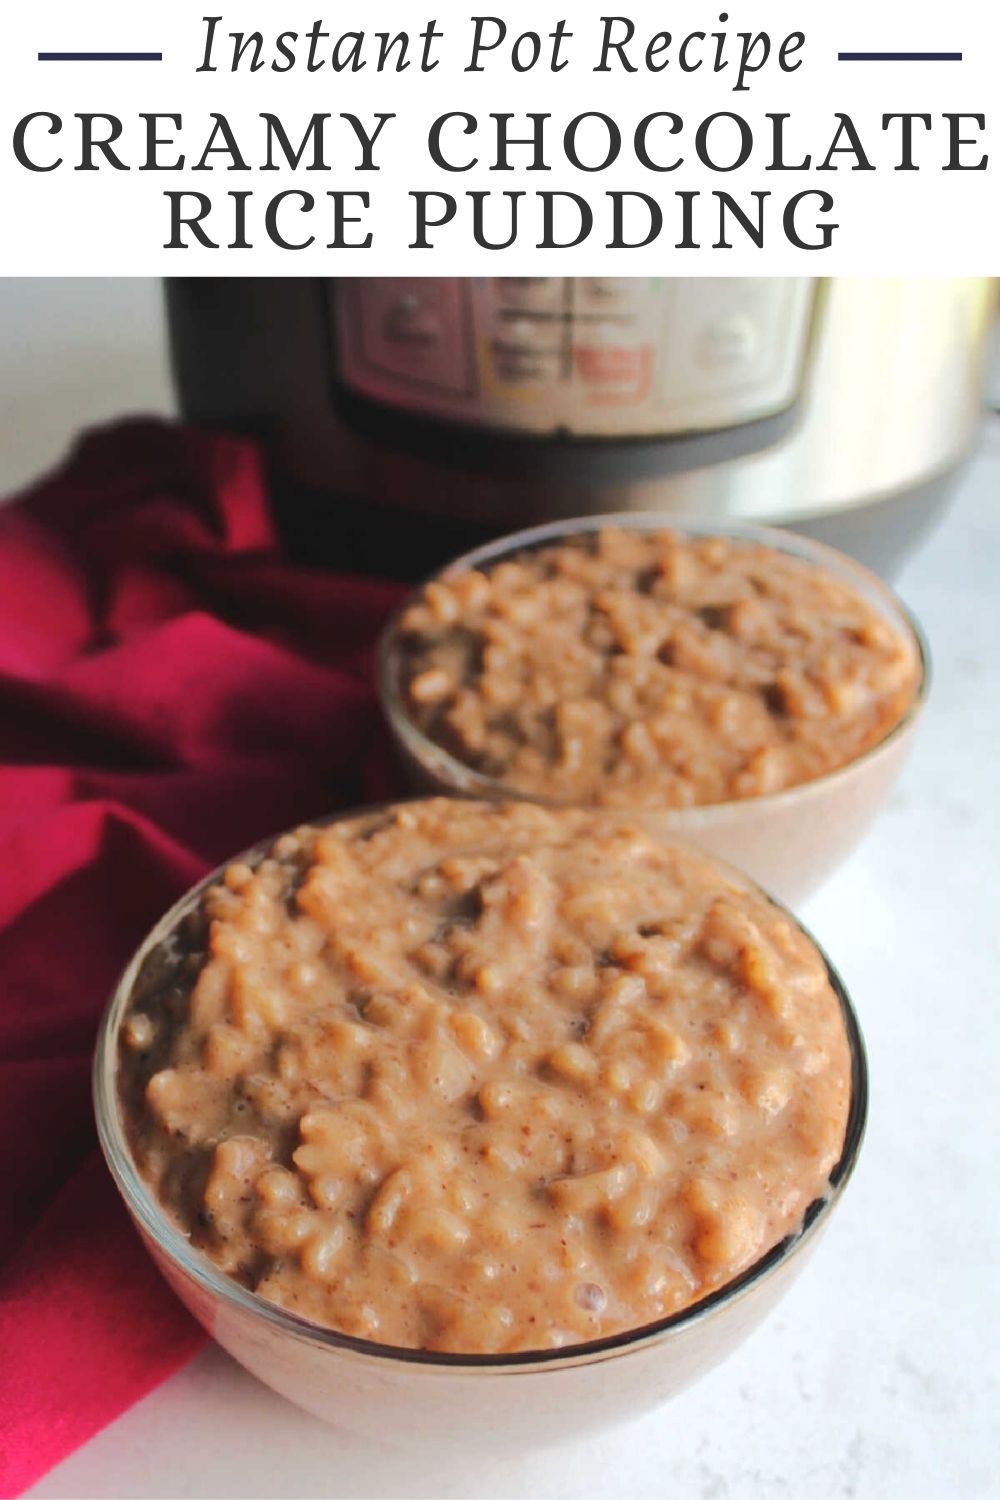 Make creamy chocolate rice pudding in the instant pot for a comforting sweet treat. This updated twist on classic rice pudding is quick and easy to make with the rich creaminess of condensed milk and a fabulous cocoa flavor.